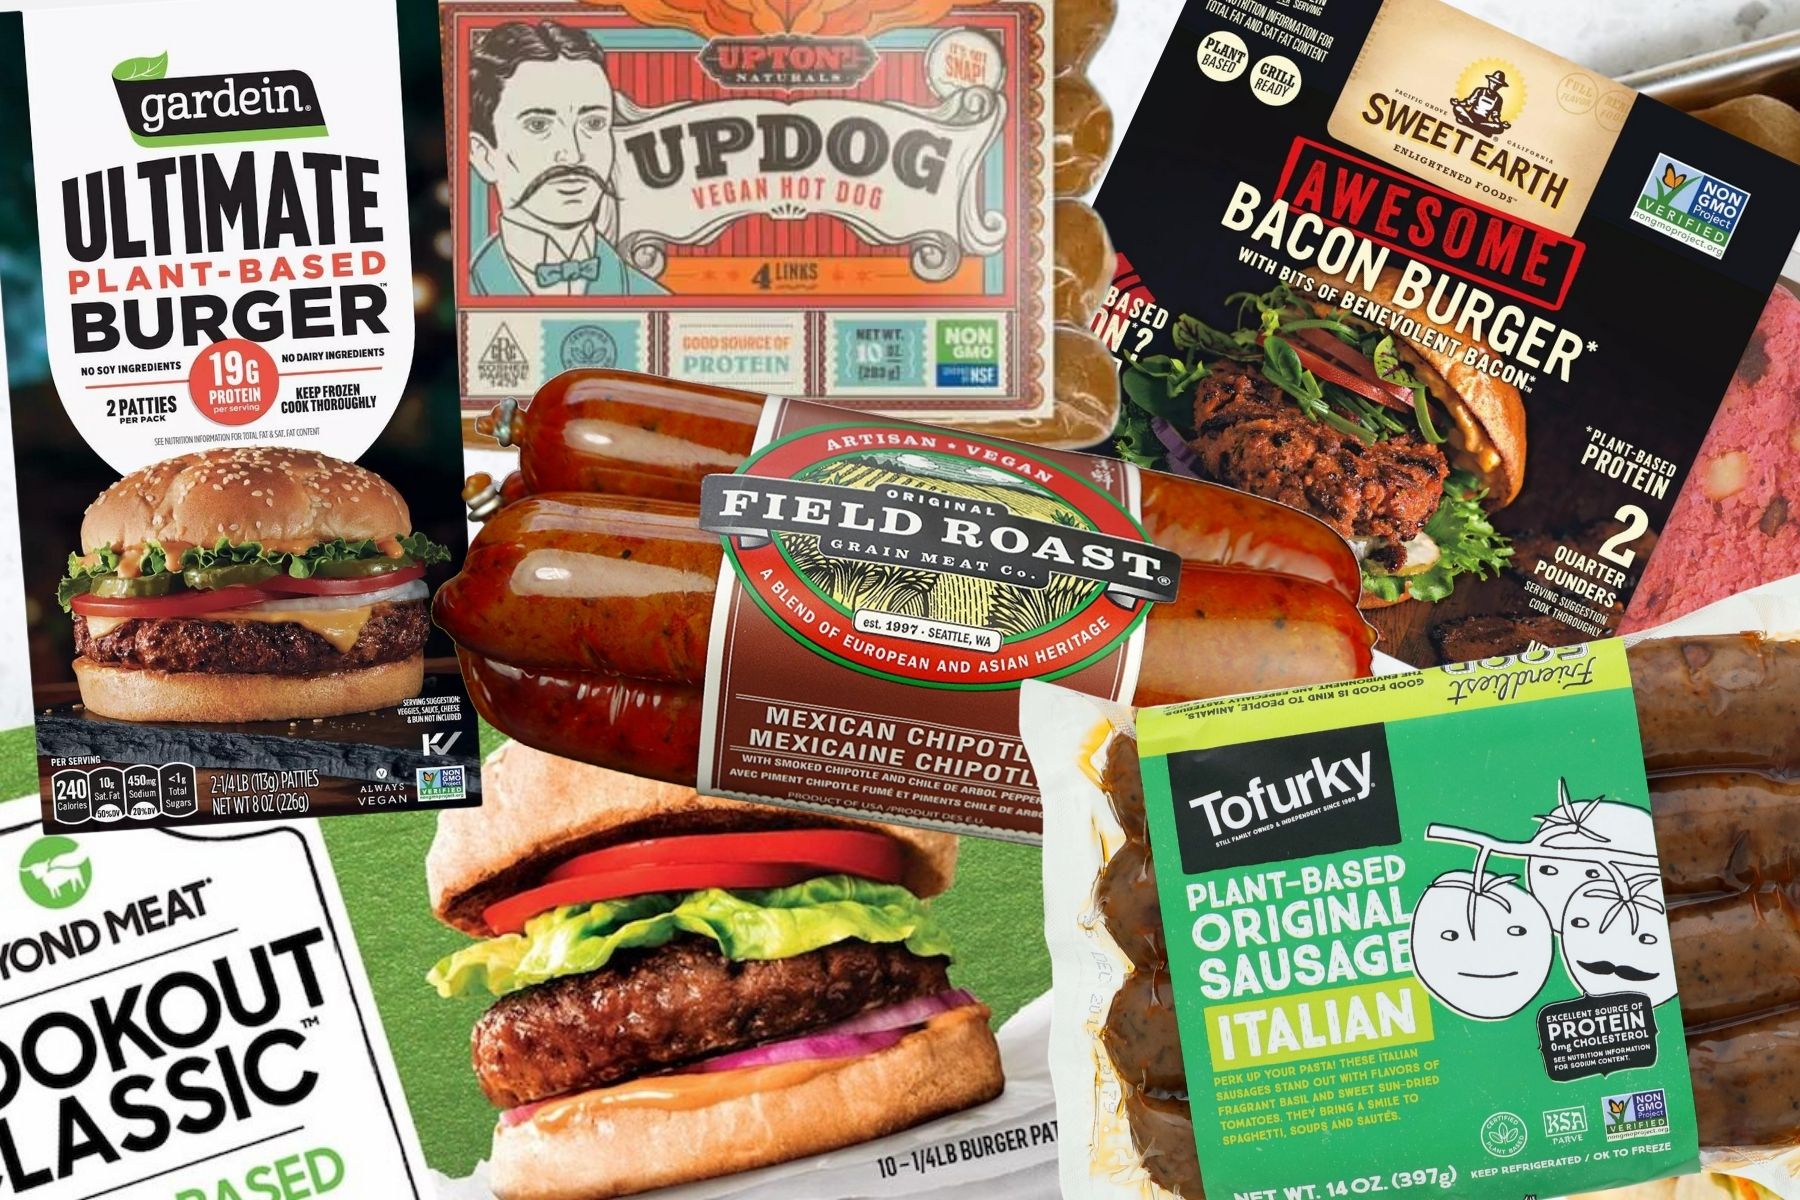 An assortment of vegan burgers and sausages in packaging